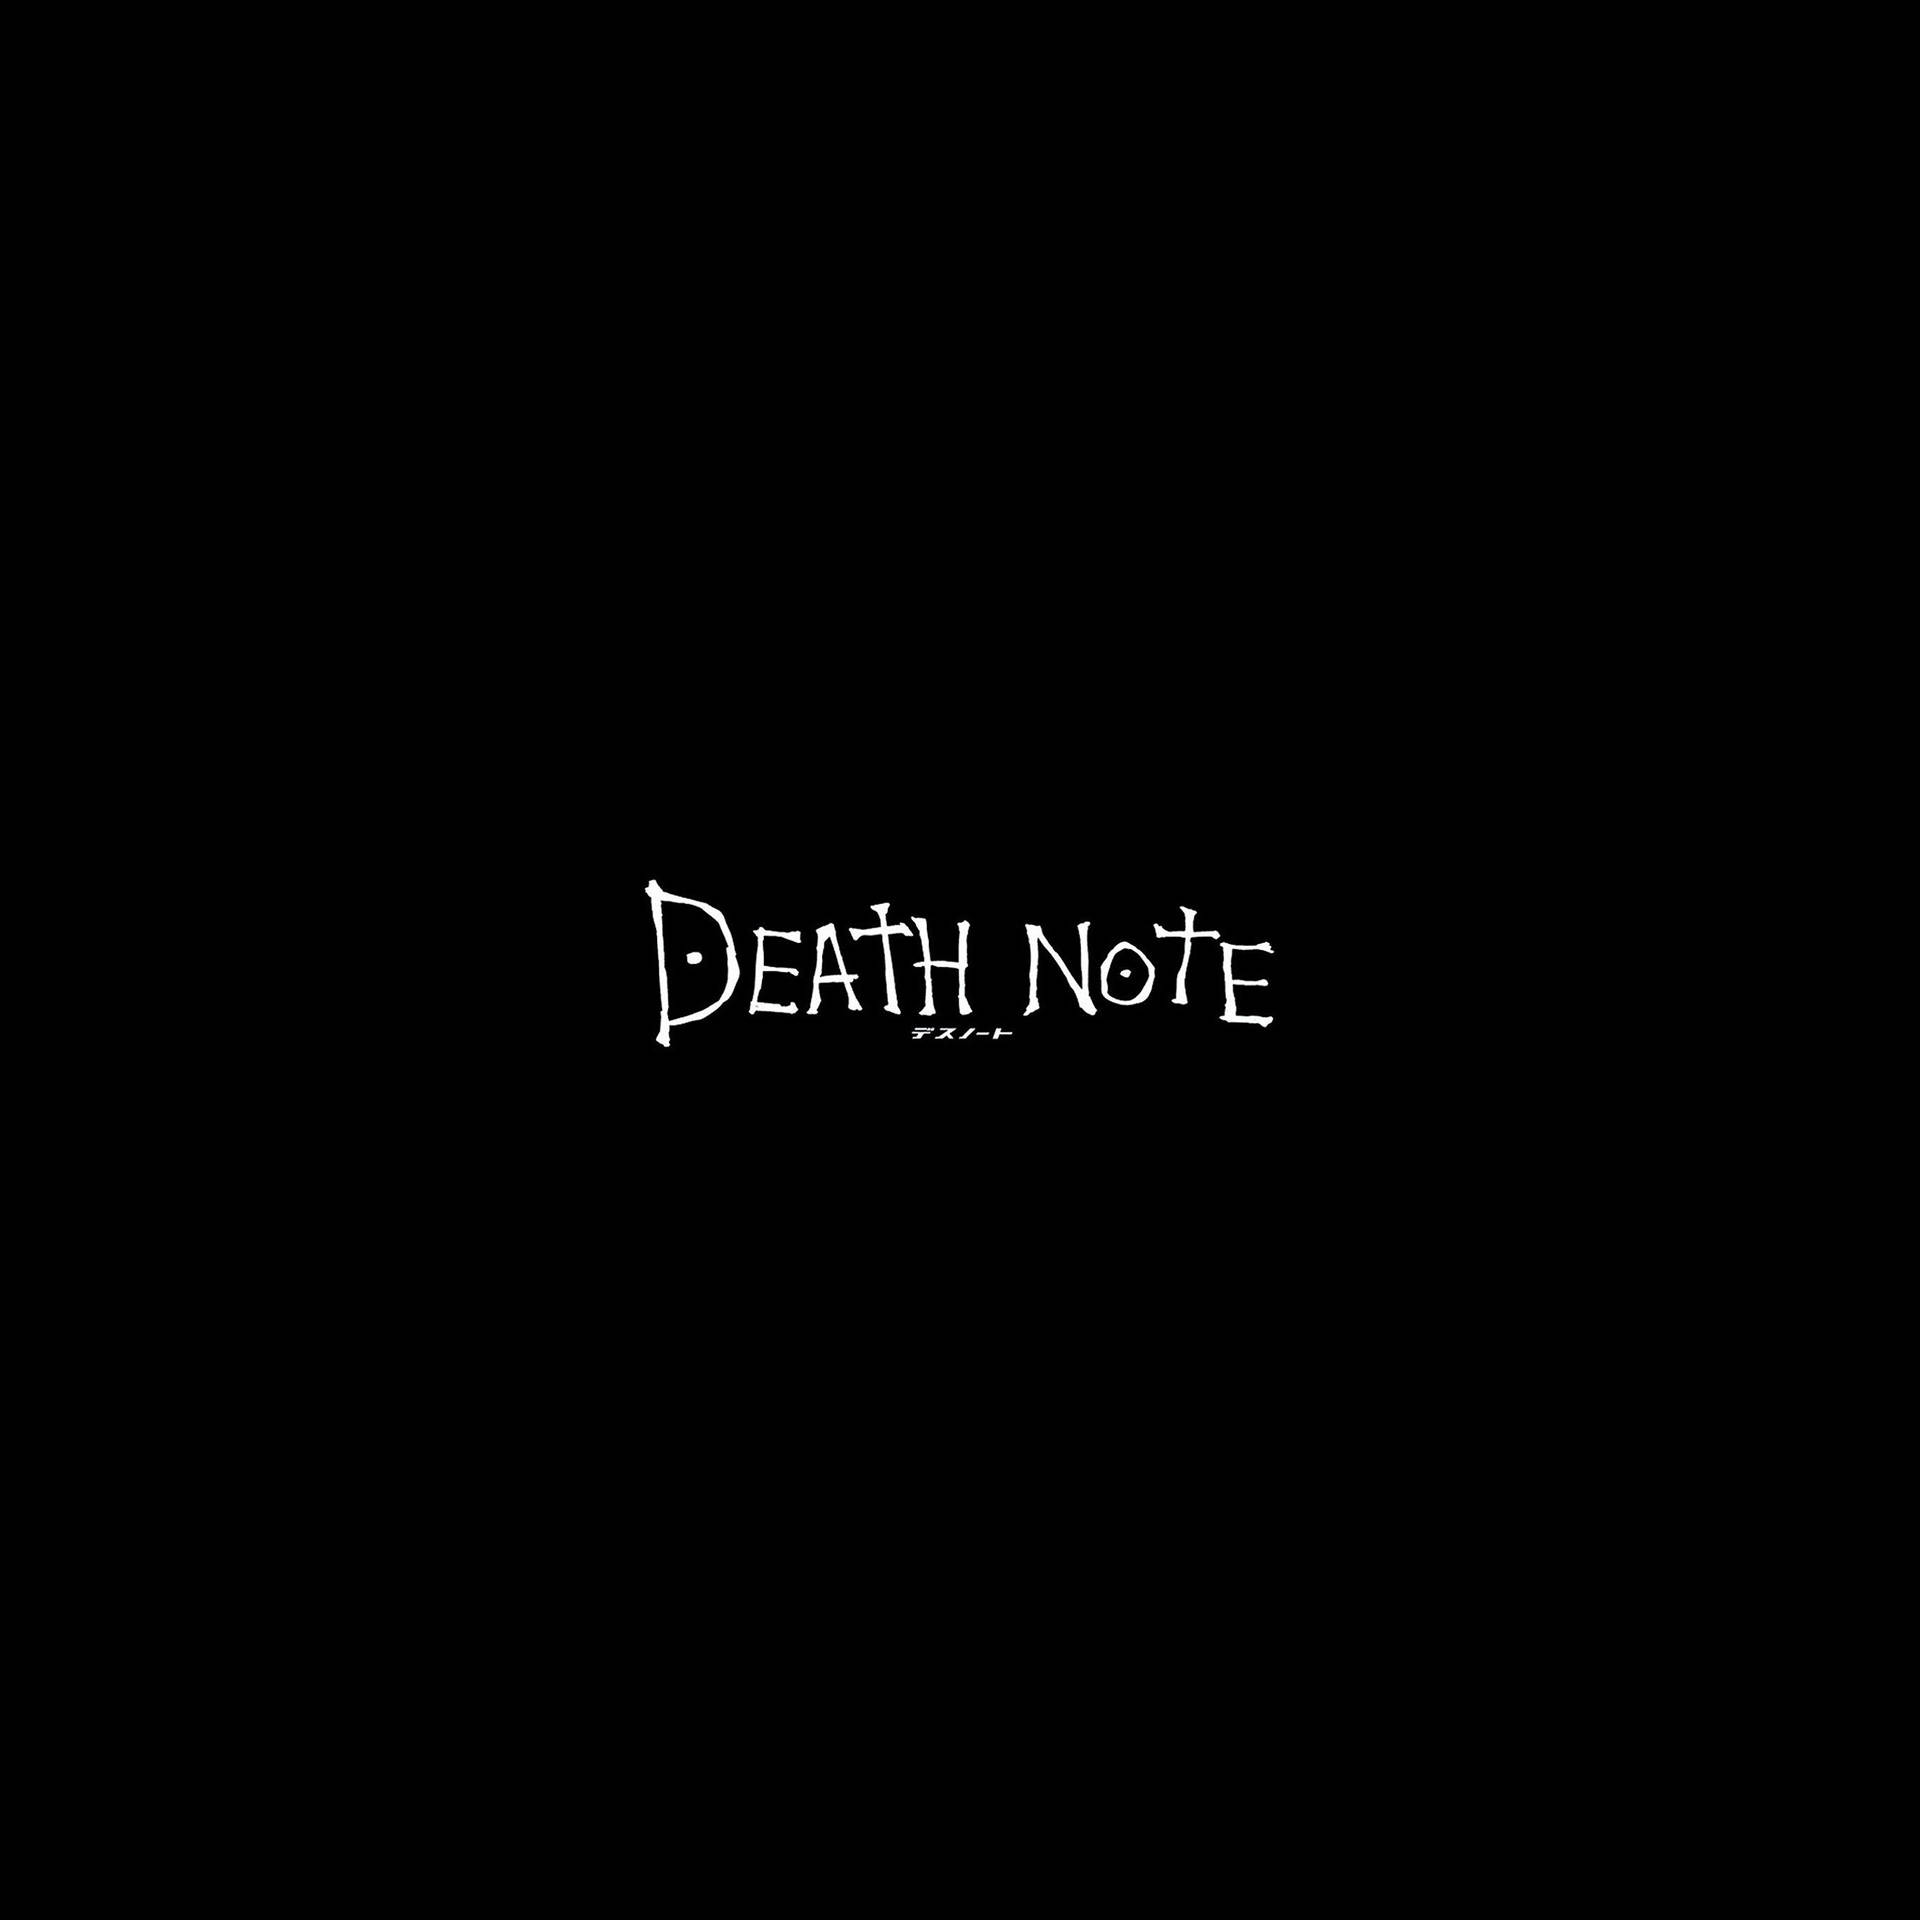 Light Yagami and the Death Note Wallpaper